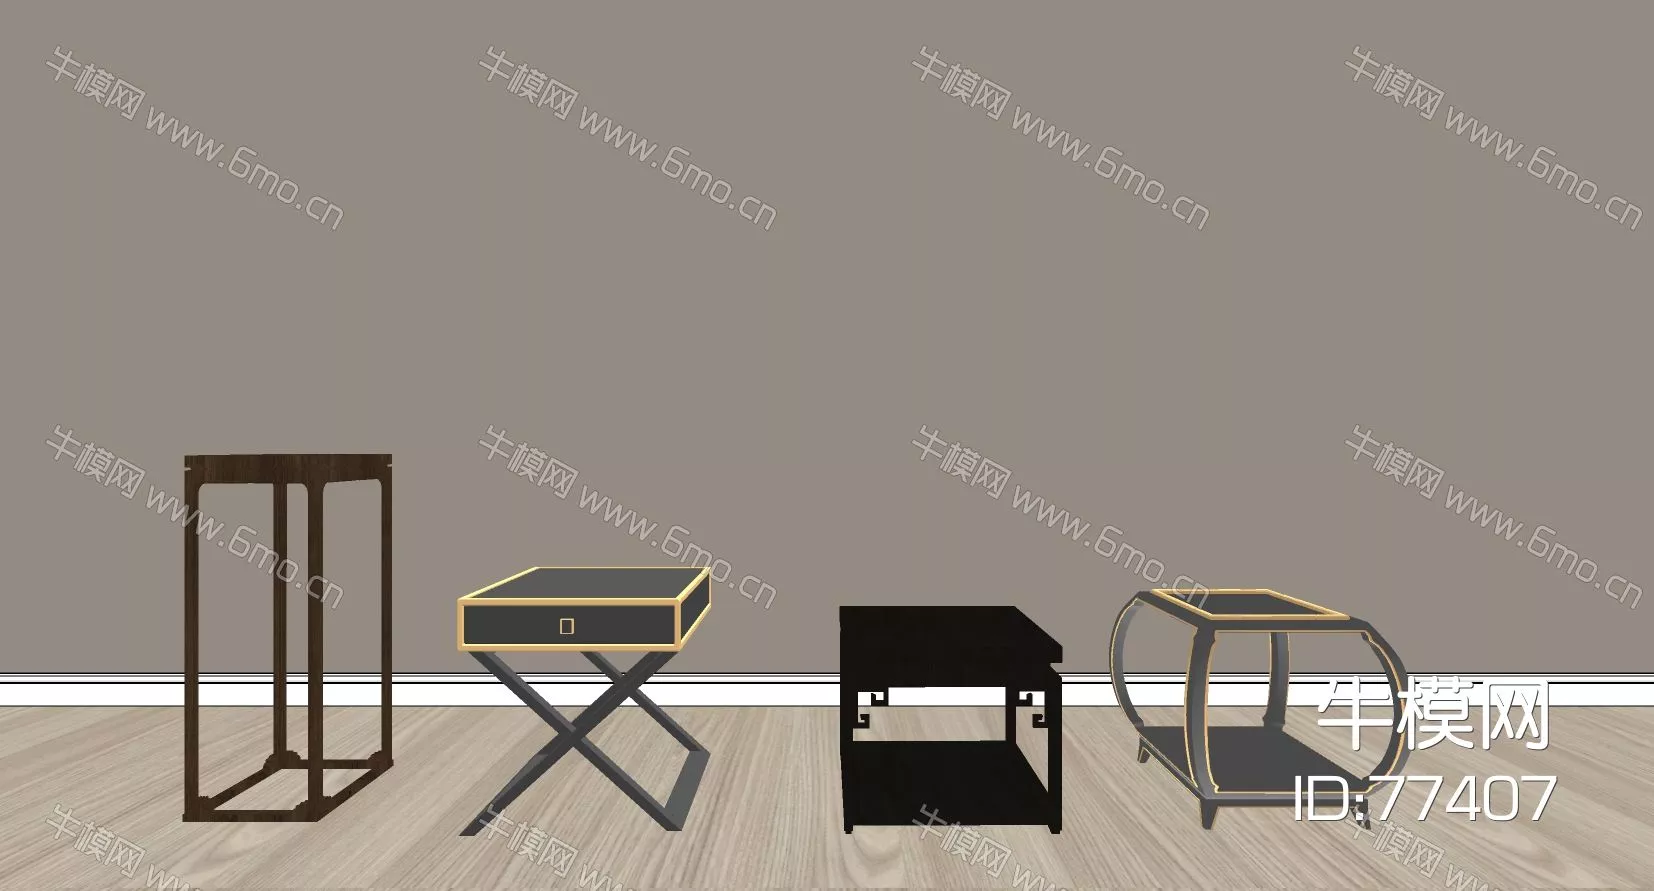 CHINESE SIDE TABLE - SKETCHUP 3D MODEL - ENSCAPE - 77407